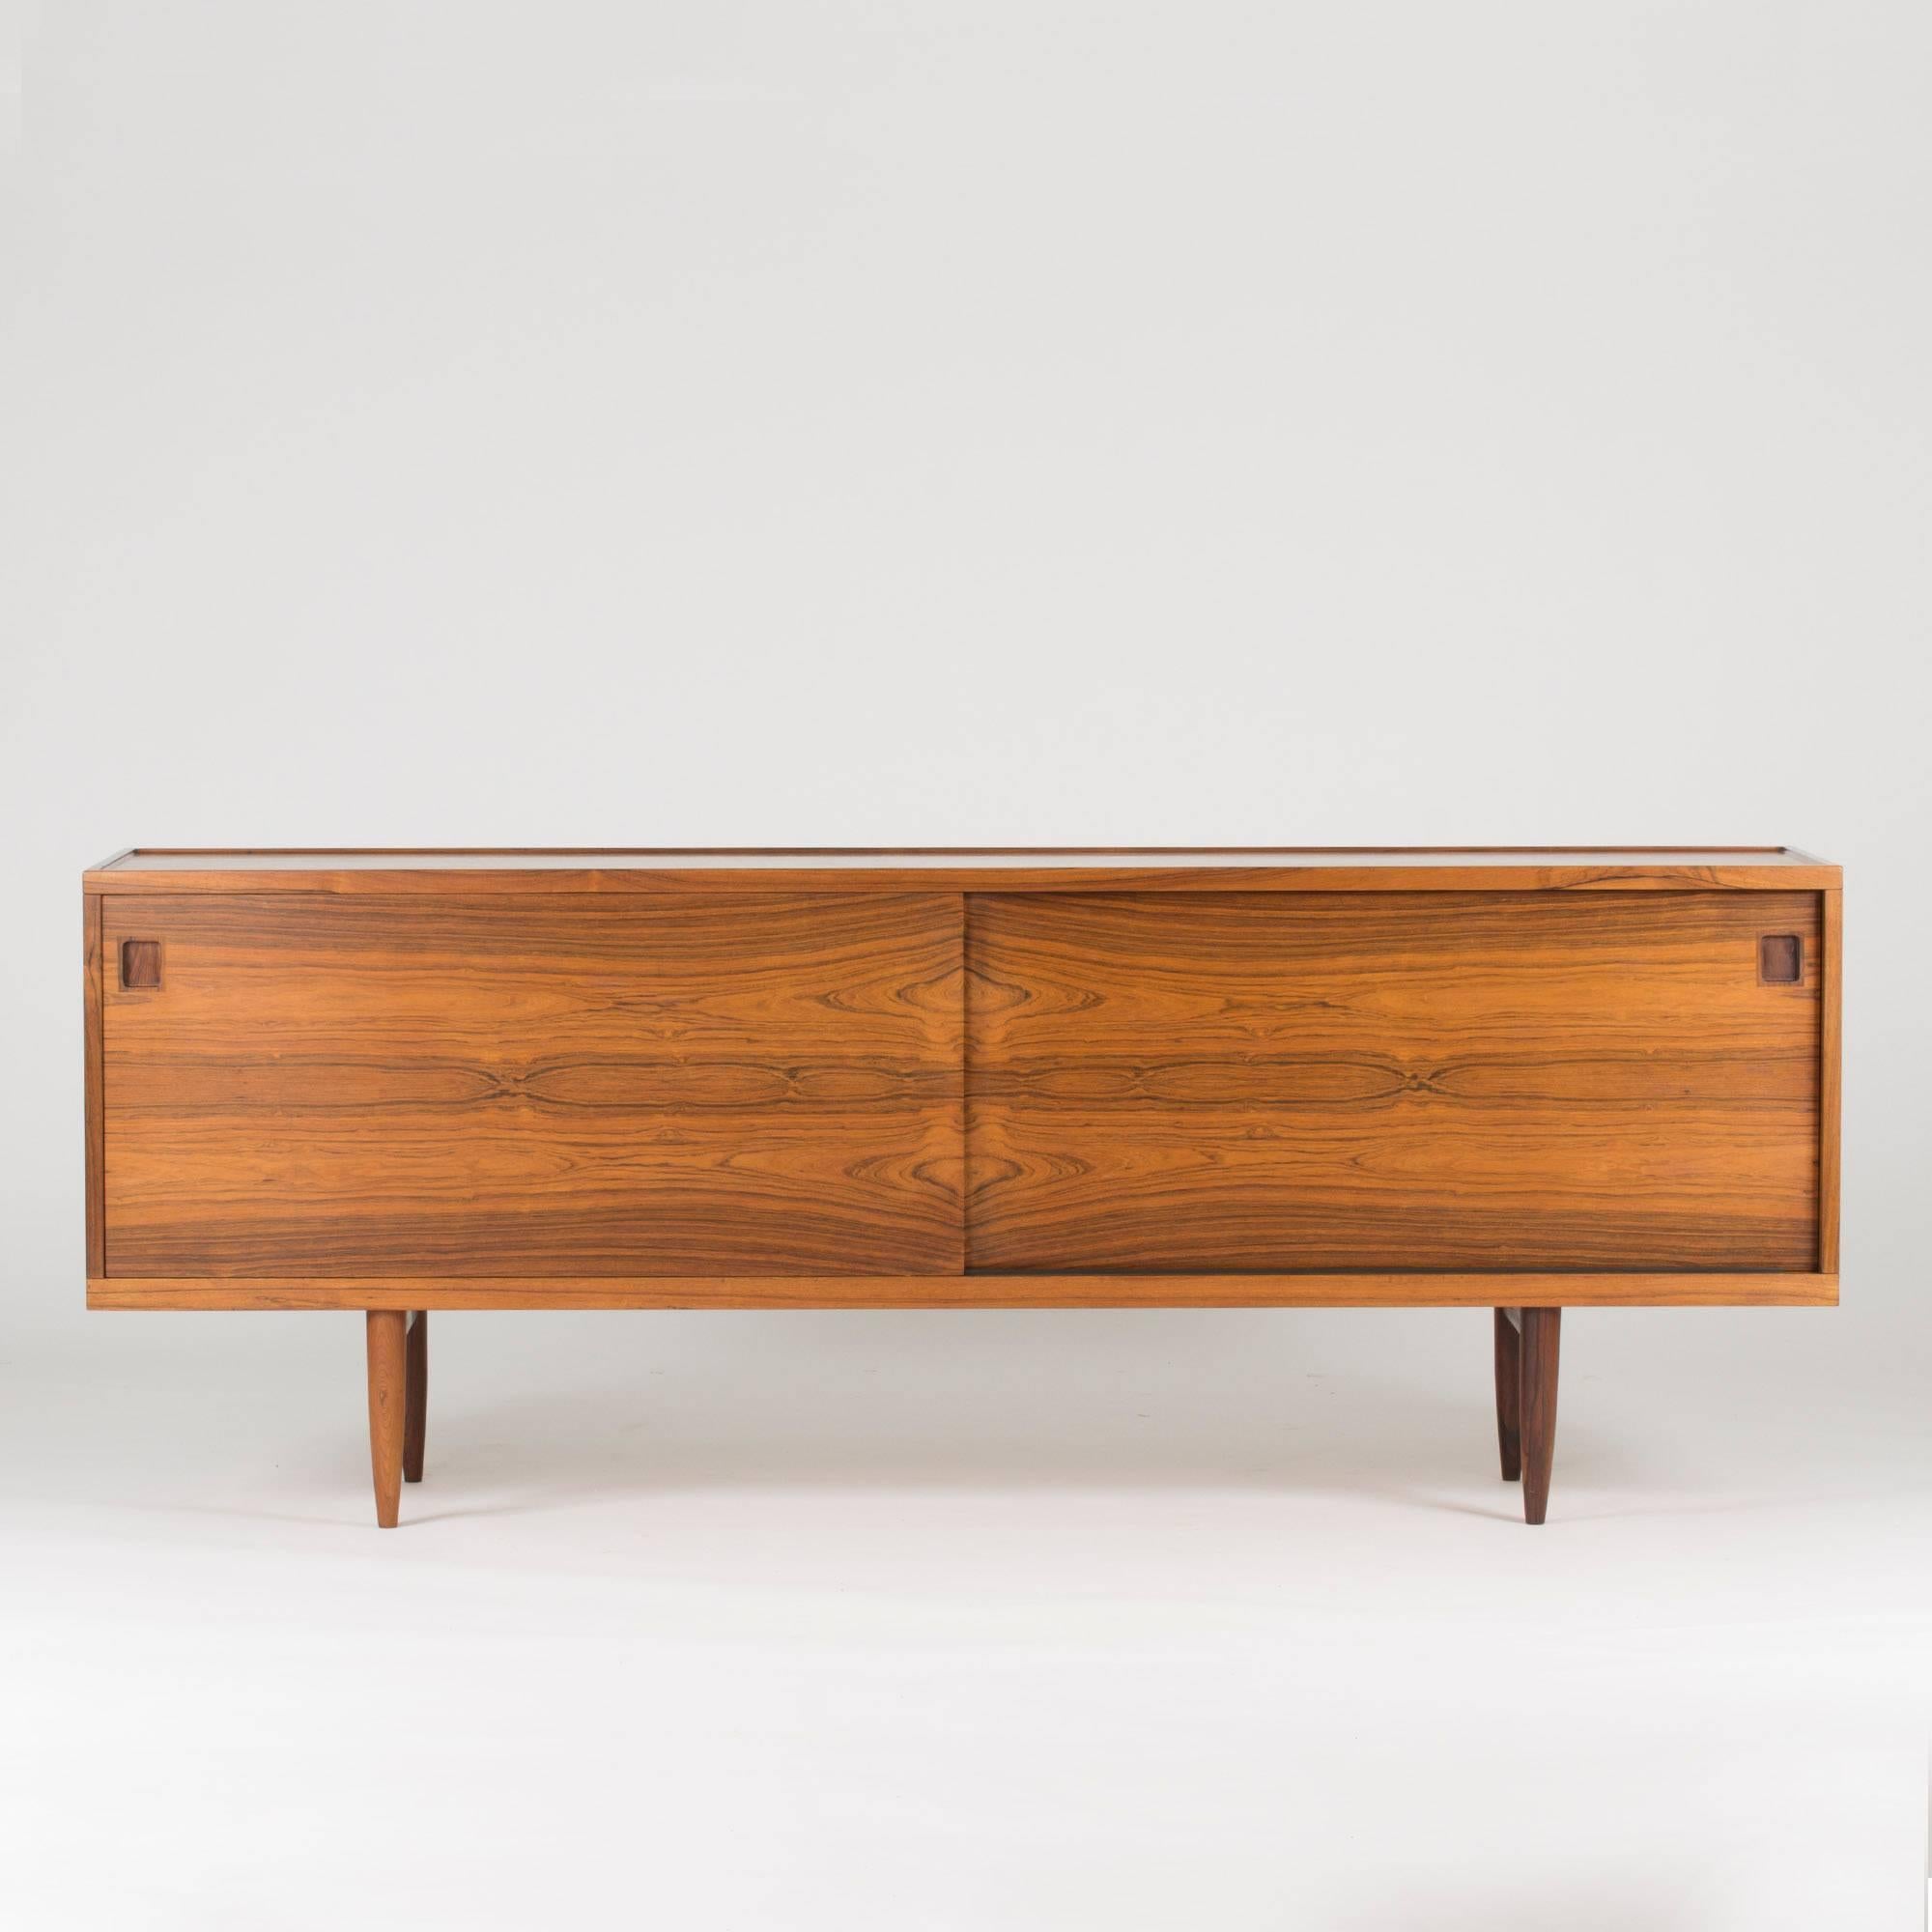 Exquisite rosewood sideboard by Niels O. Møller in a smooth design where the beautiful wood grain falls into focus on the two sliding doors. The top is carved in a soft curve around the edge, giving this piece an extra dimension that at first can go